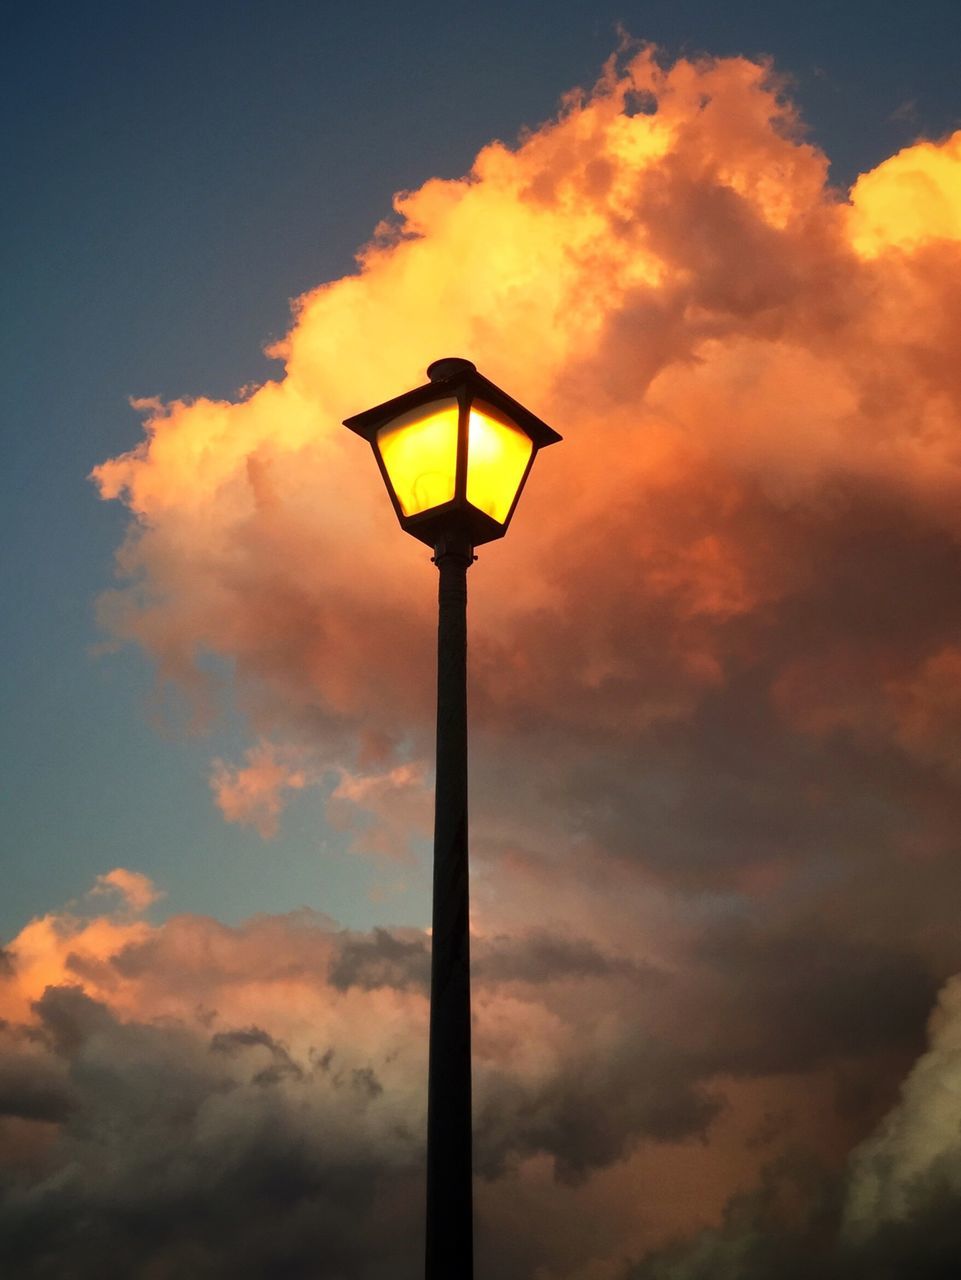 low angle view, sky, sunset, cloud - sky, street light, lighting equipment, cloudy, cloud, silhouette, orange color, nature, tranquility, beauty in nature, pole, scenics, weather, yellow, dusk, dramatic sky, outdoors